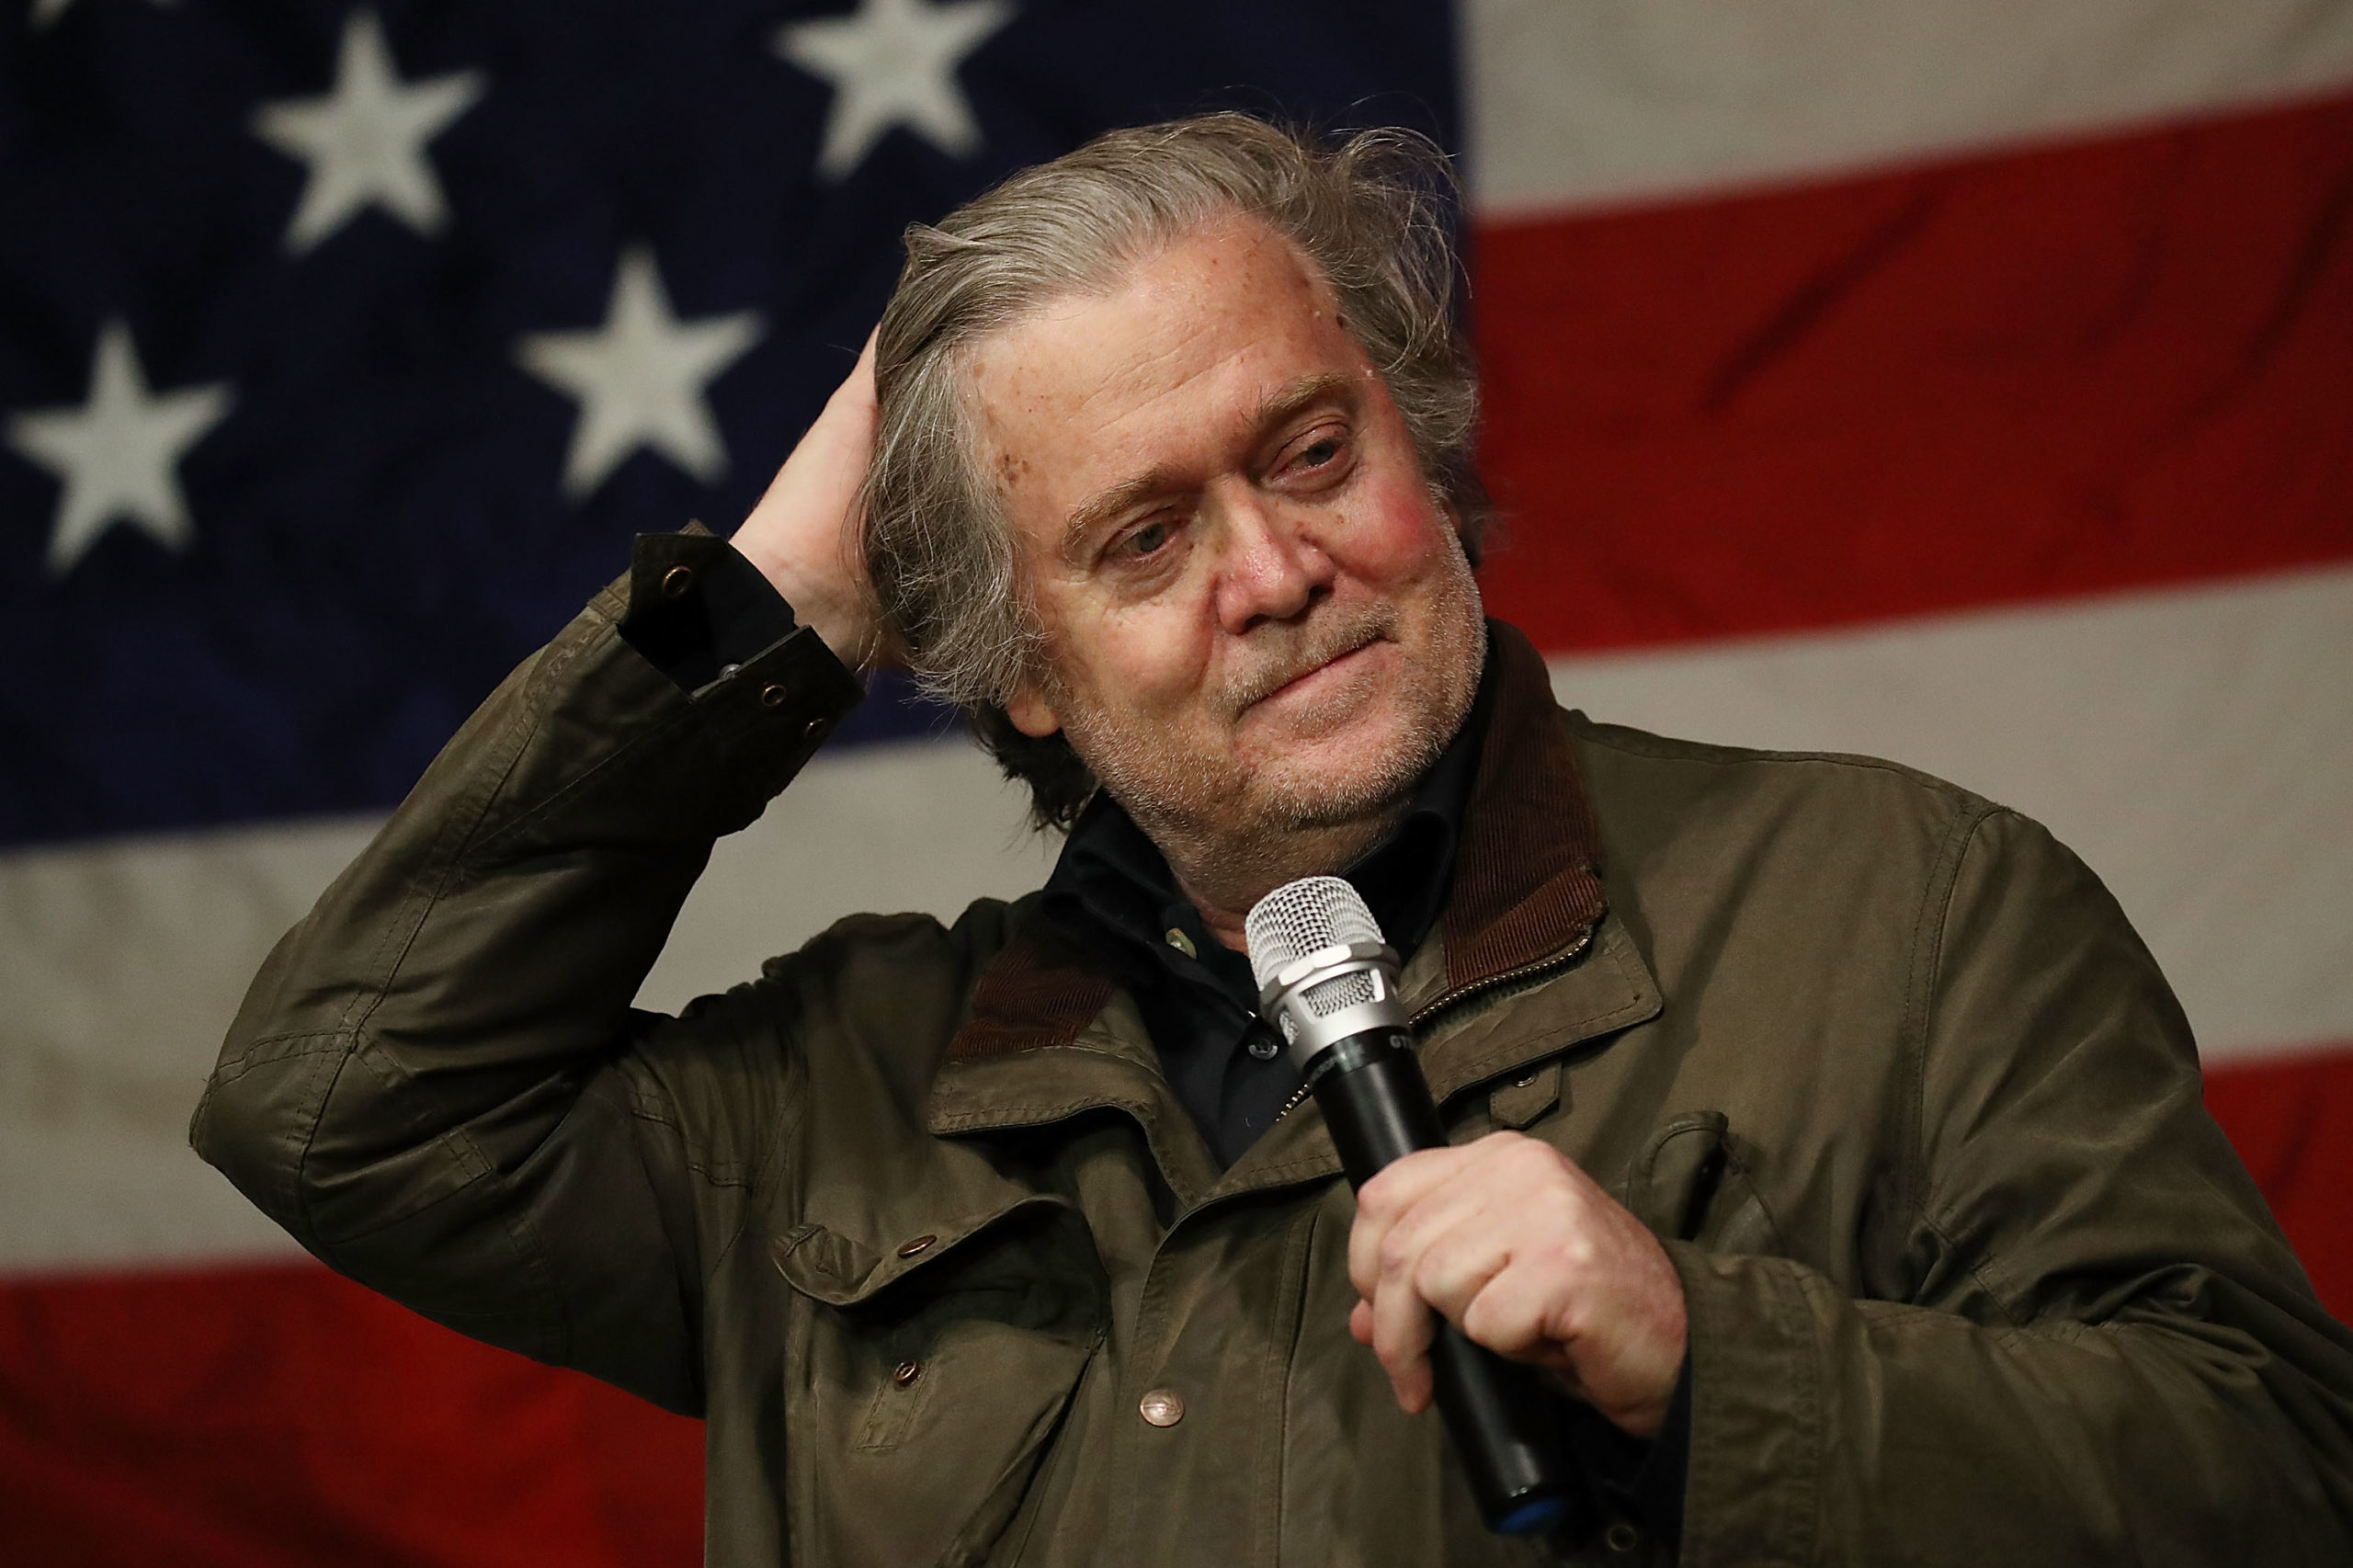 FAIRHOPE, AL - DECEMBER 05: Steve Bannon speaks before introducing Republican Senatorial candidate Roy Moore during a campaign event at Oak Hollow Farm on December 5, 2017 in Fairhope, Alabama. Mr. Moore is facing off against Democrat Doug Jones in next week's special election for the U.S. Senate. (Photo by Joe Raedle/Getty Images)